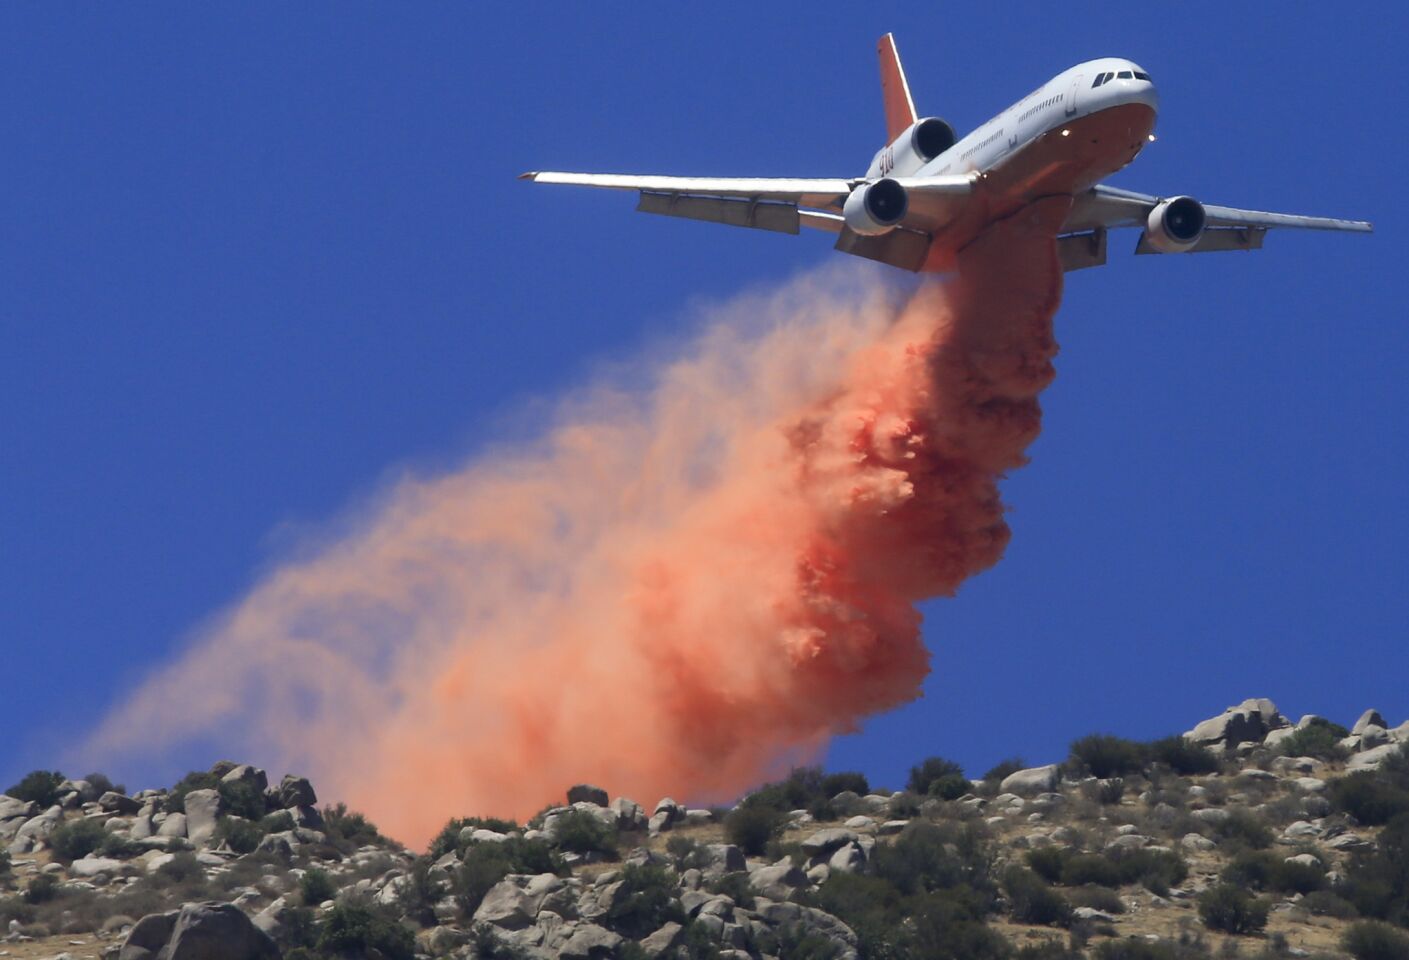 A DC-10 tanker drops retardant ahead of the fire line on the mountains above Snow Creek Village near Cabazon as the 16,000-acre Silver fire in Riverside County continues to burn.